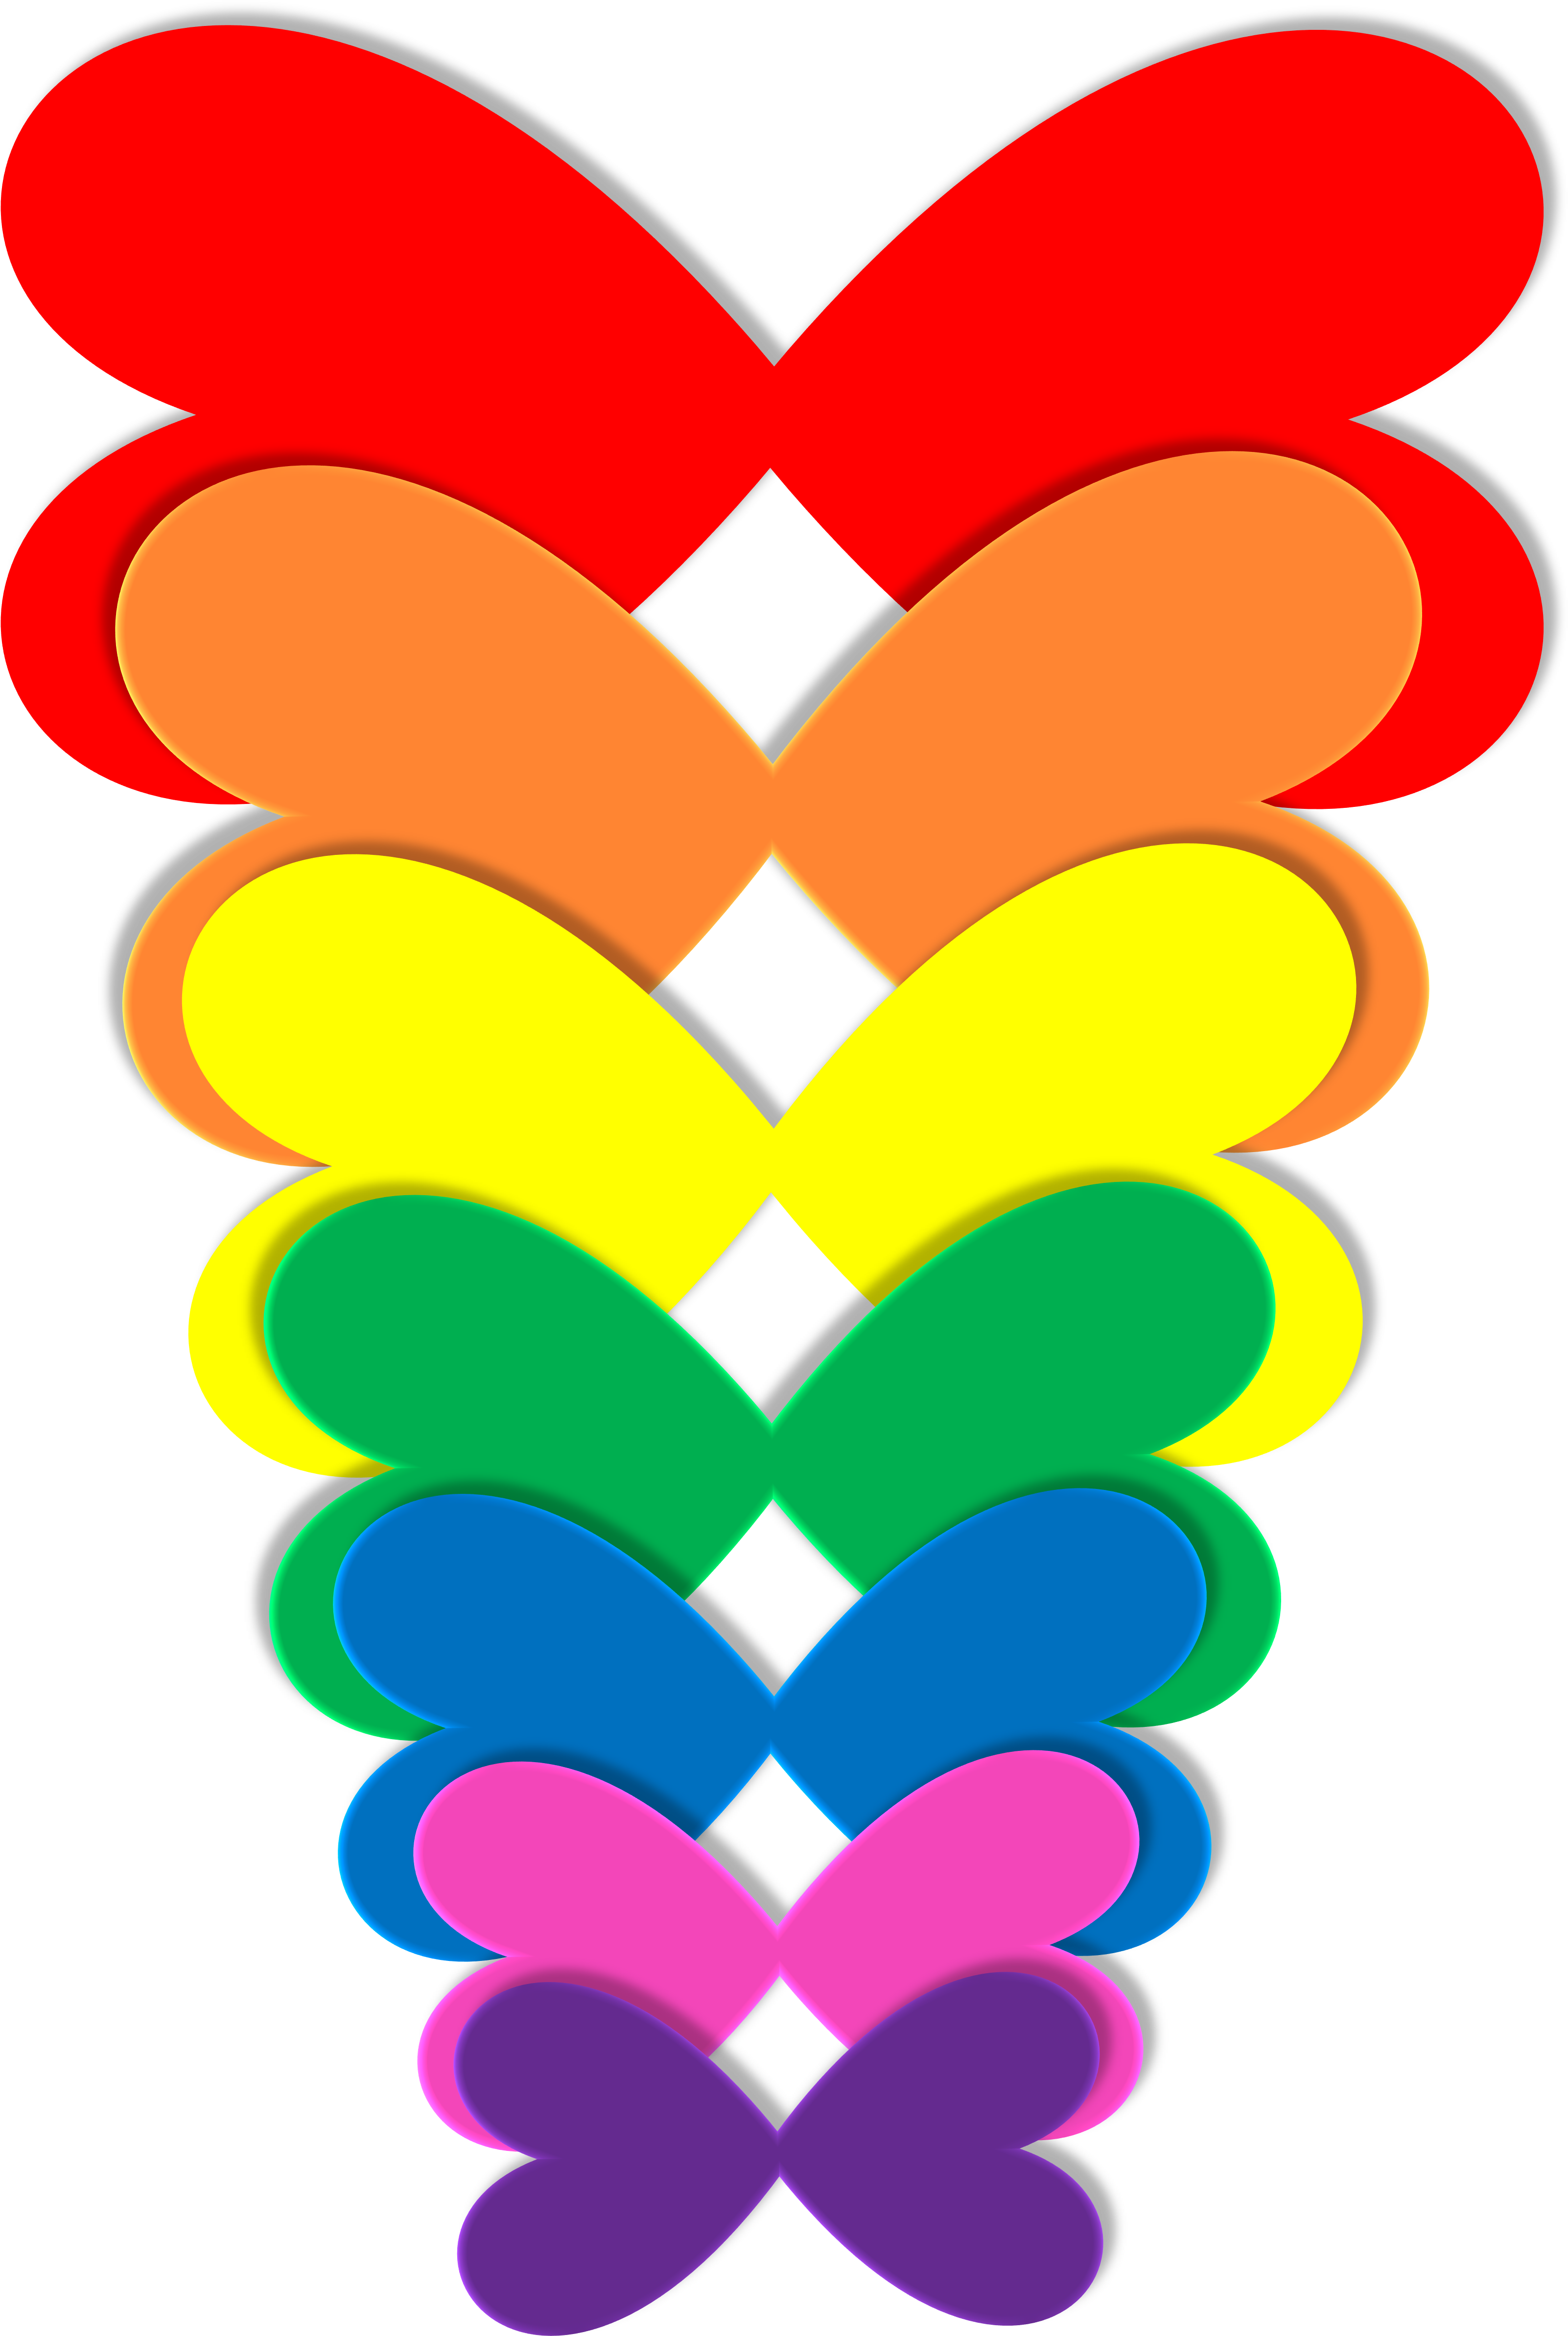 A Rainbow Colored Ovals On A Black Background